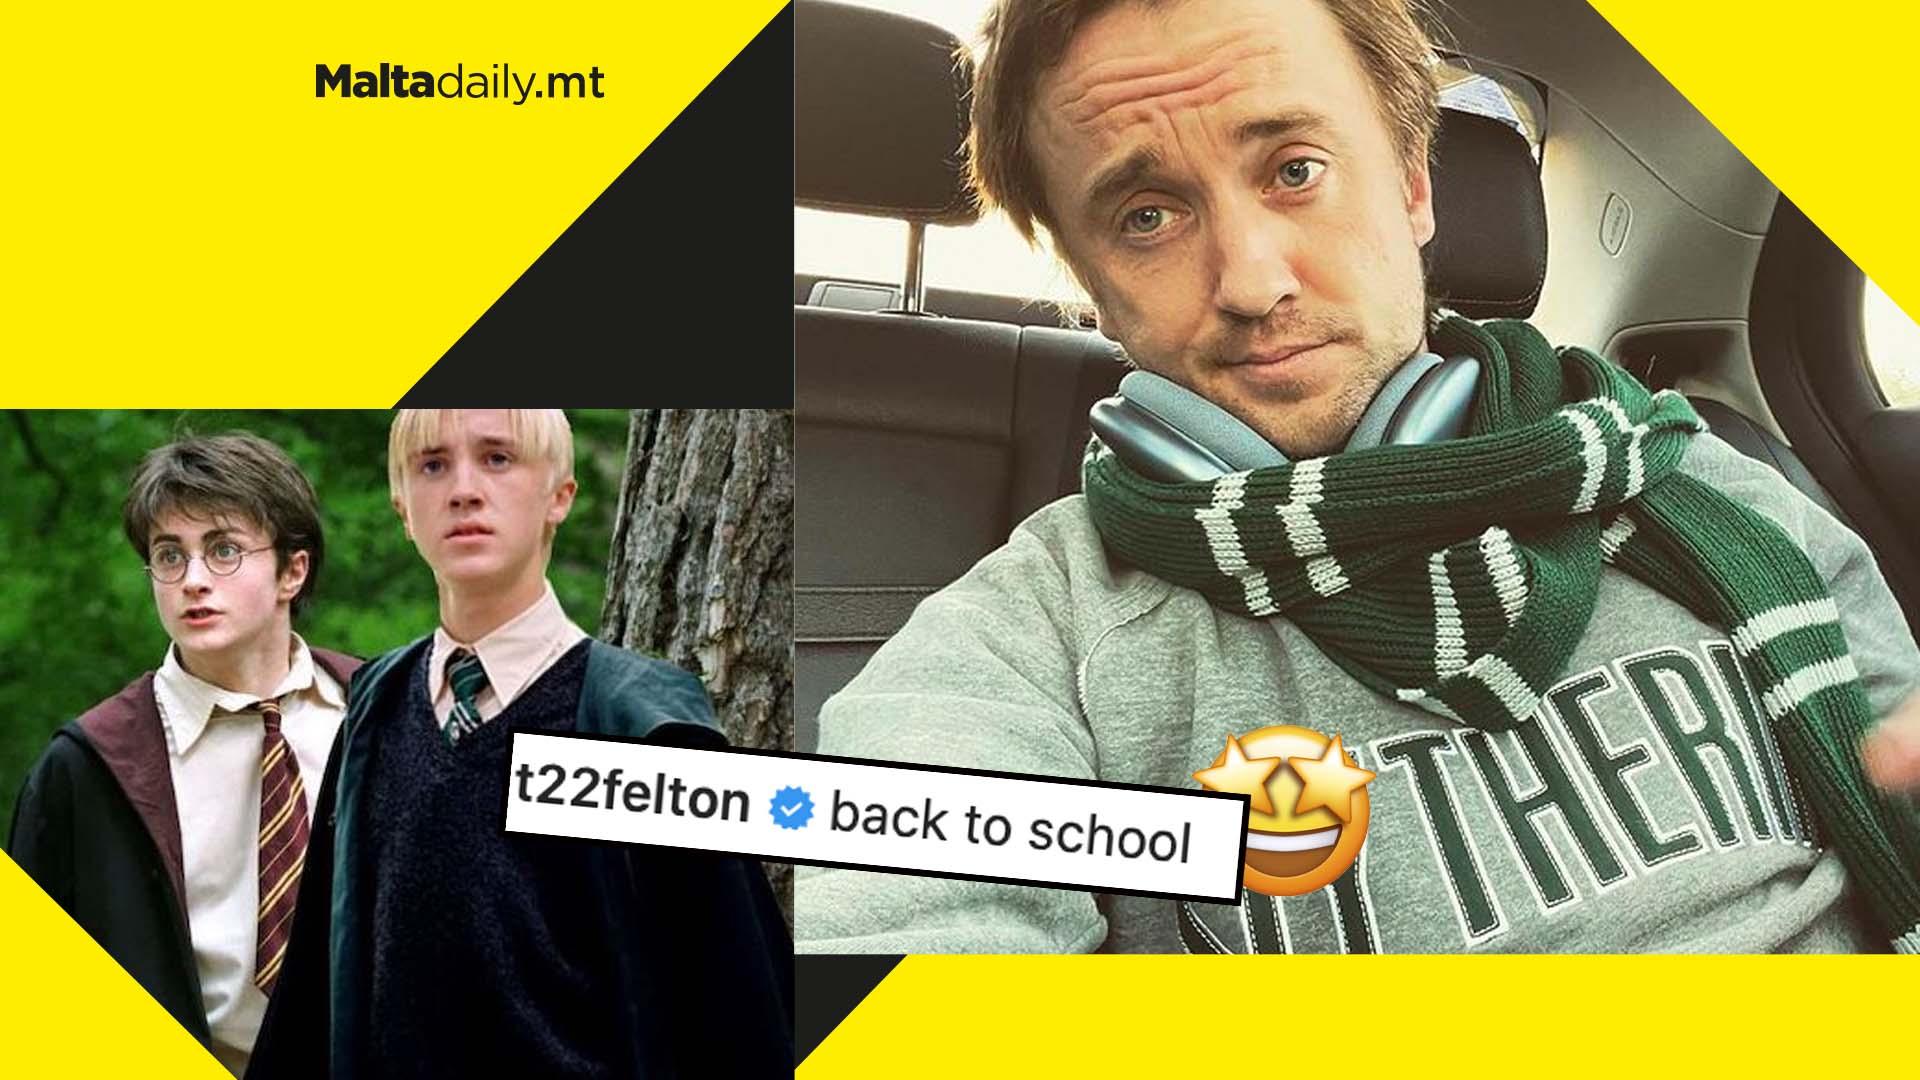 Draco Malfoy is going back to Hogwarts and the Internet is losing it